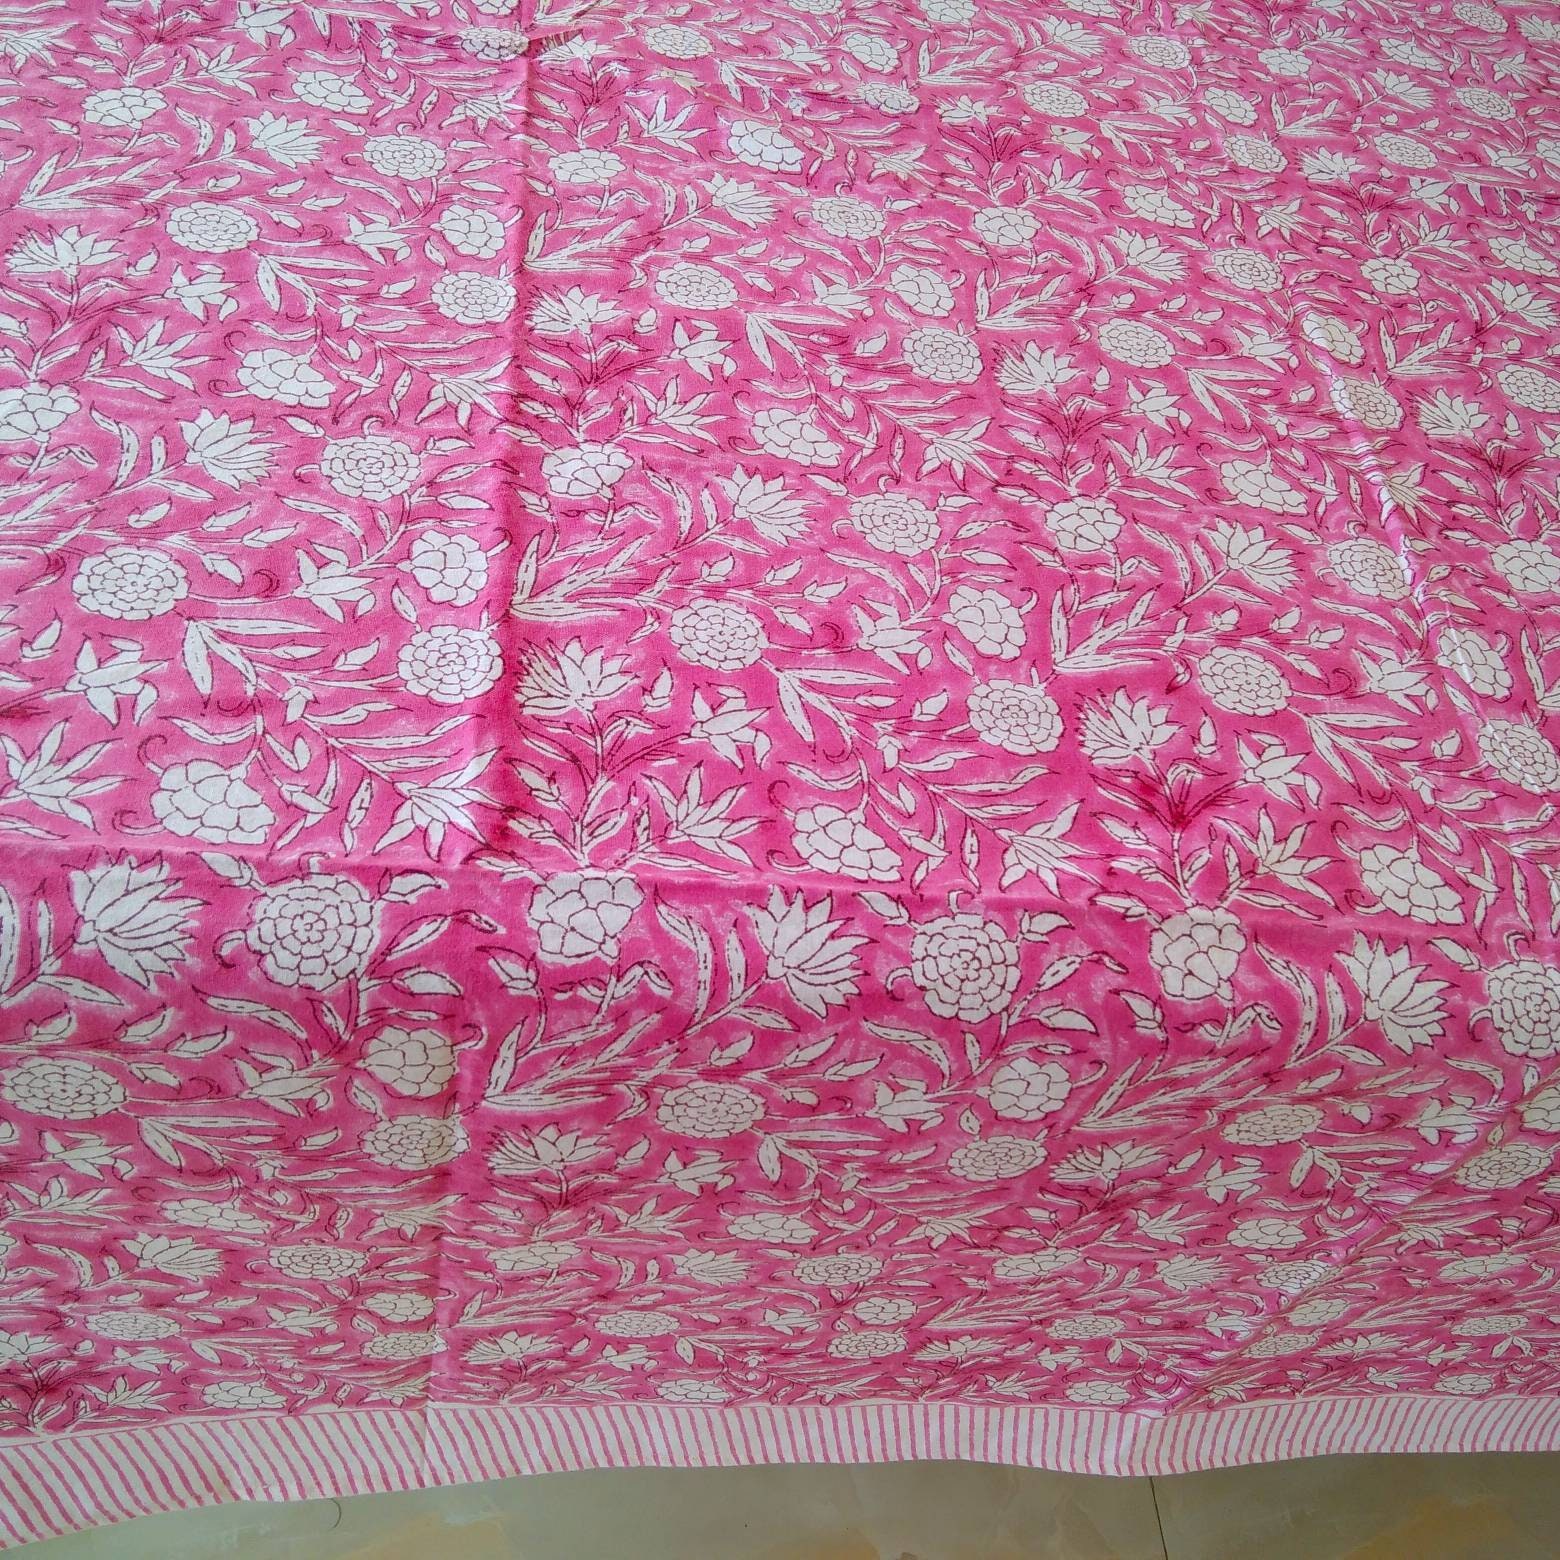 Pink Floral Tablecloth Cover Block Print Tablecloth Indian | Etsy